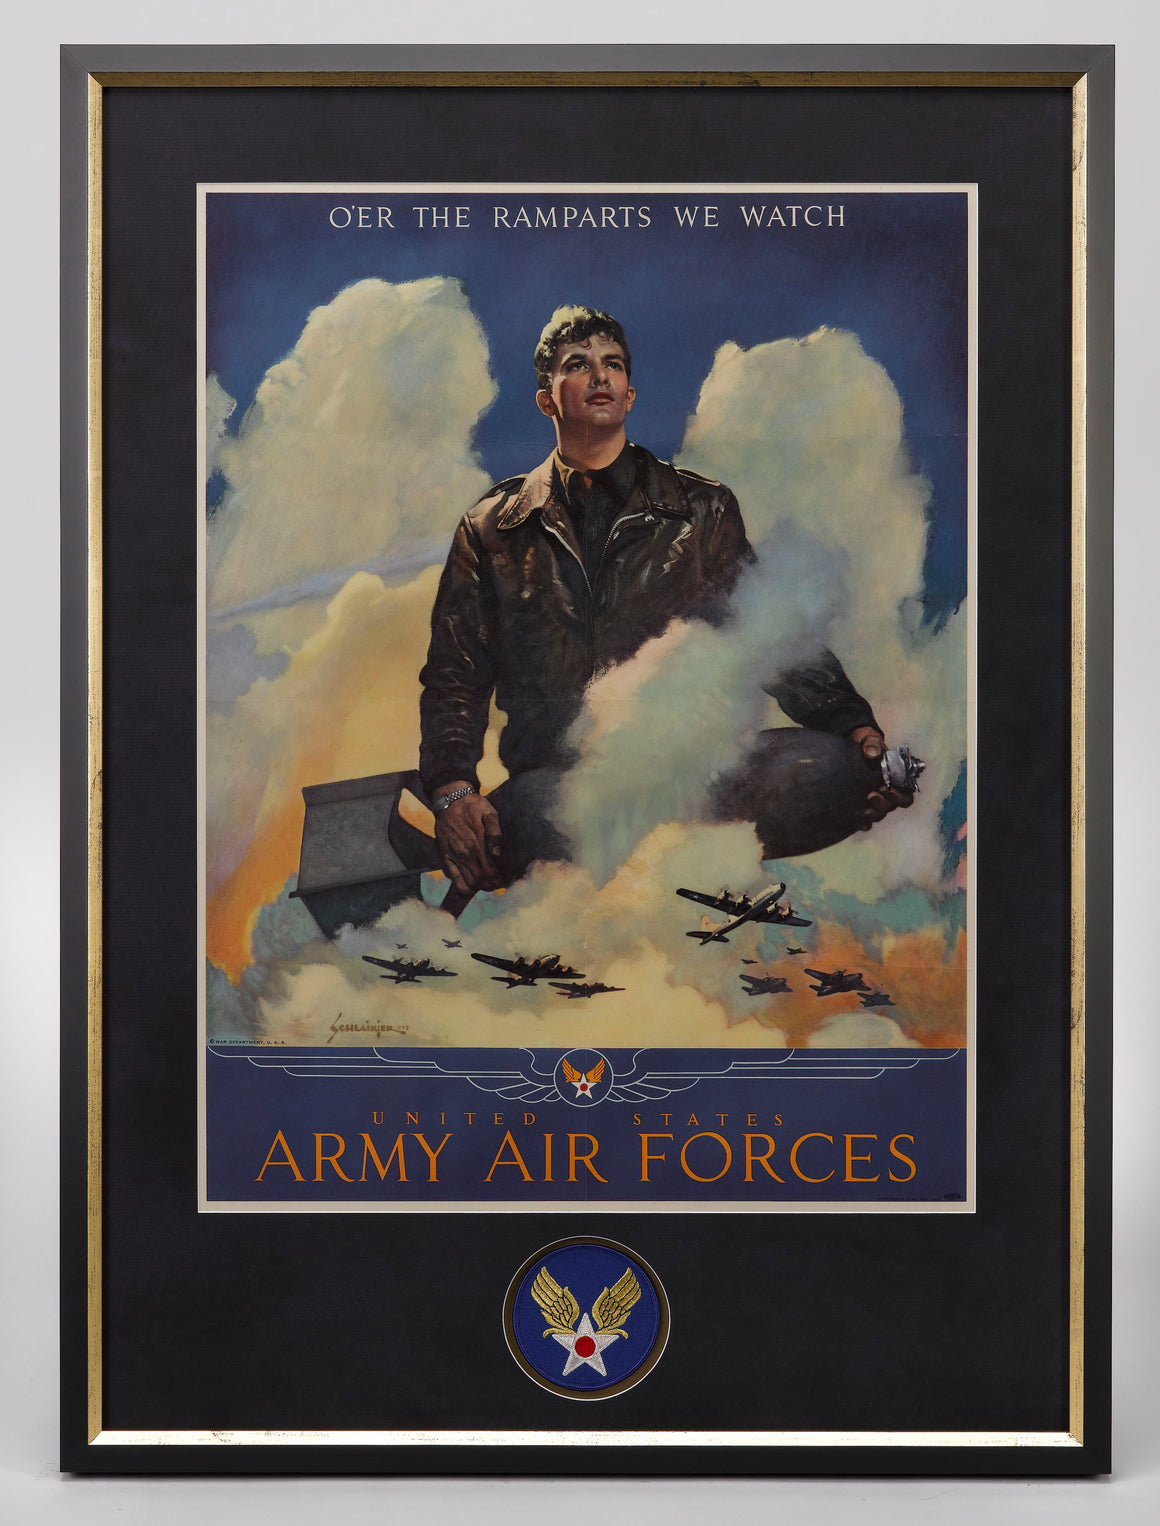 "O'er the Ramparts We Watch. United States Army Air Forces" Vintage WWII Poster by Jes Schlaikjer, 1944